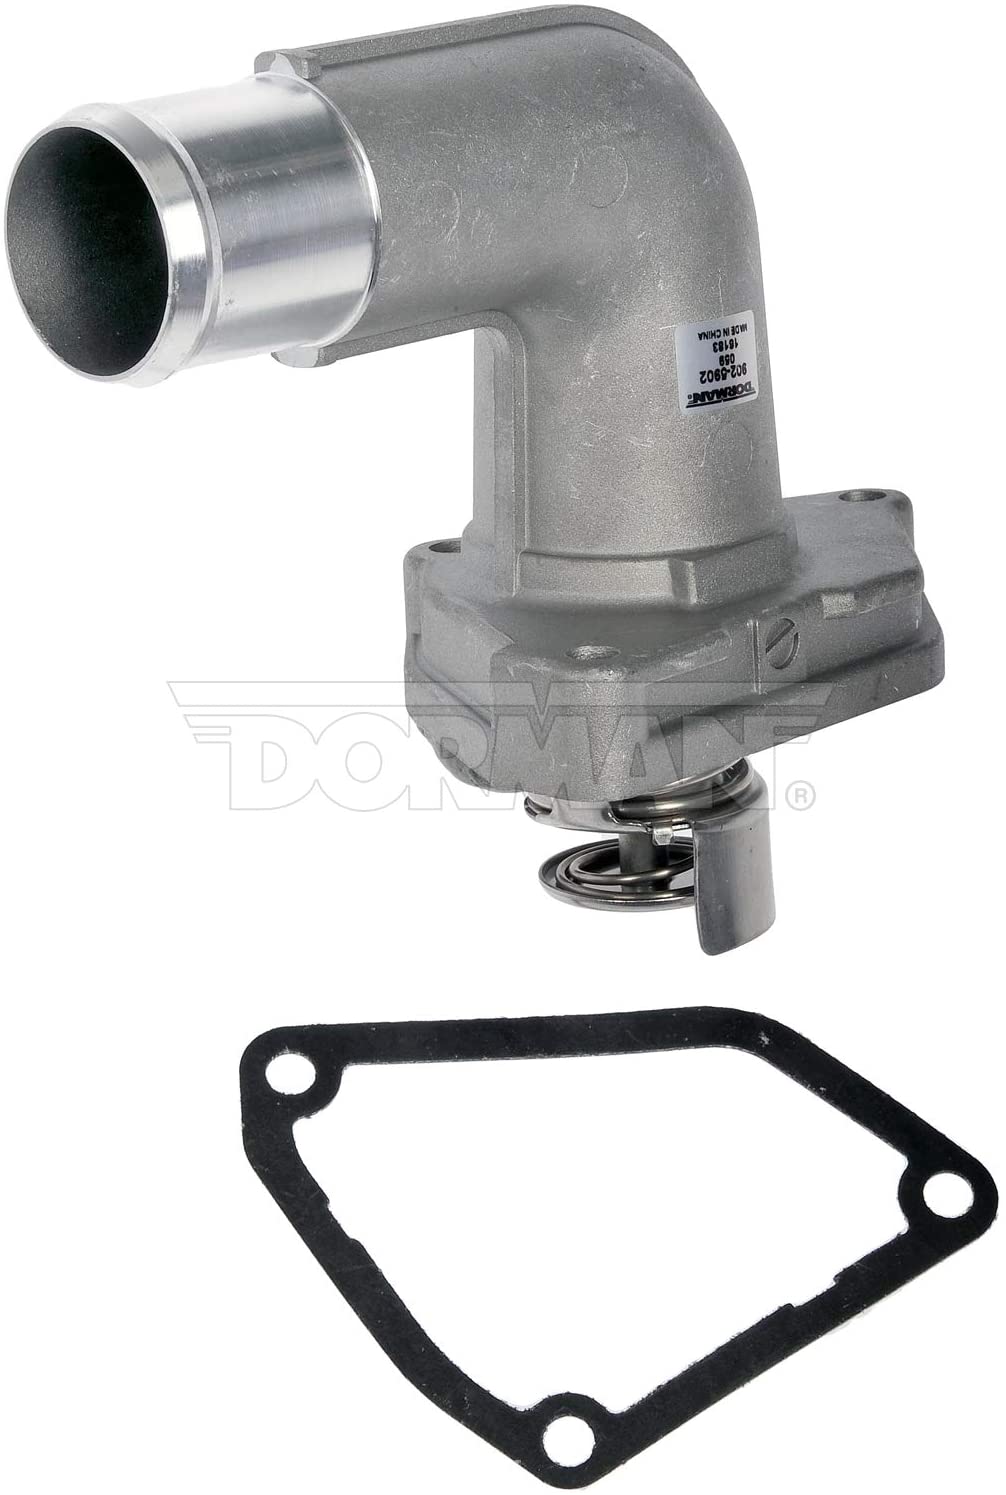 Dorman 902-5902 Engine Coolant Thermostat Housing Assembly for Select Infiniti/Nissan Models